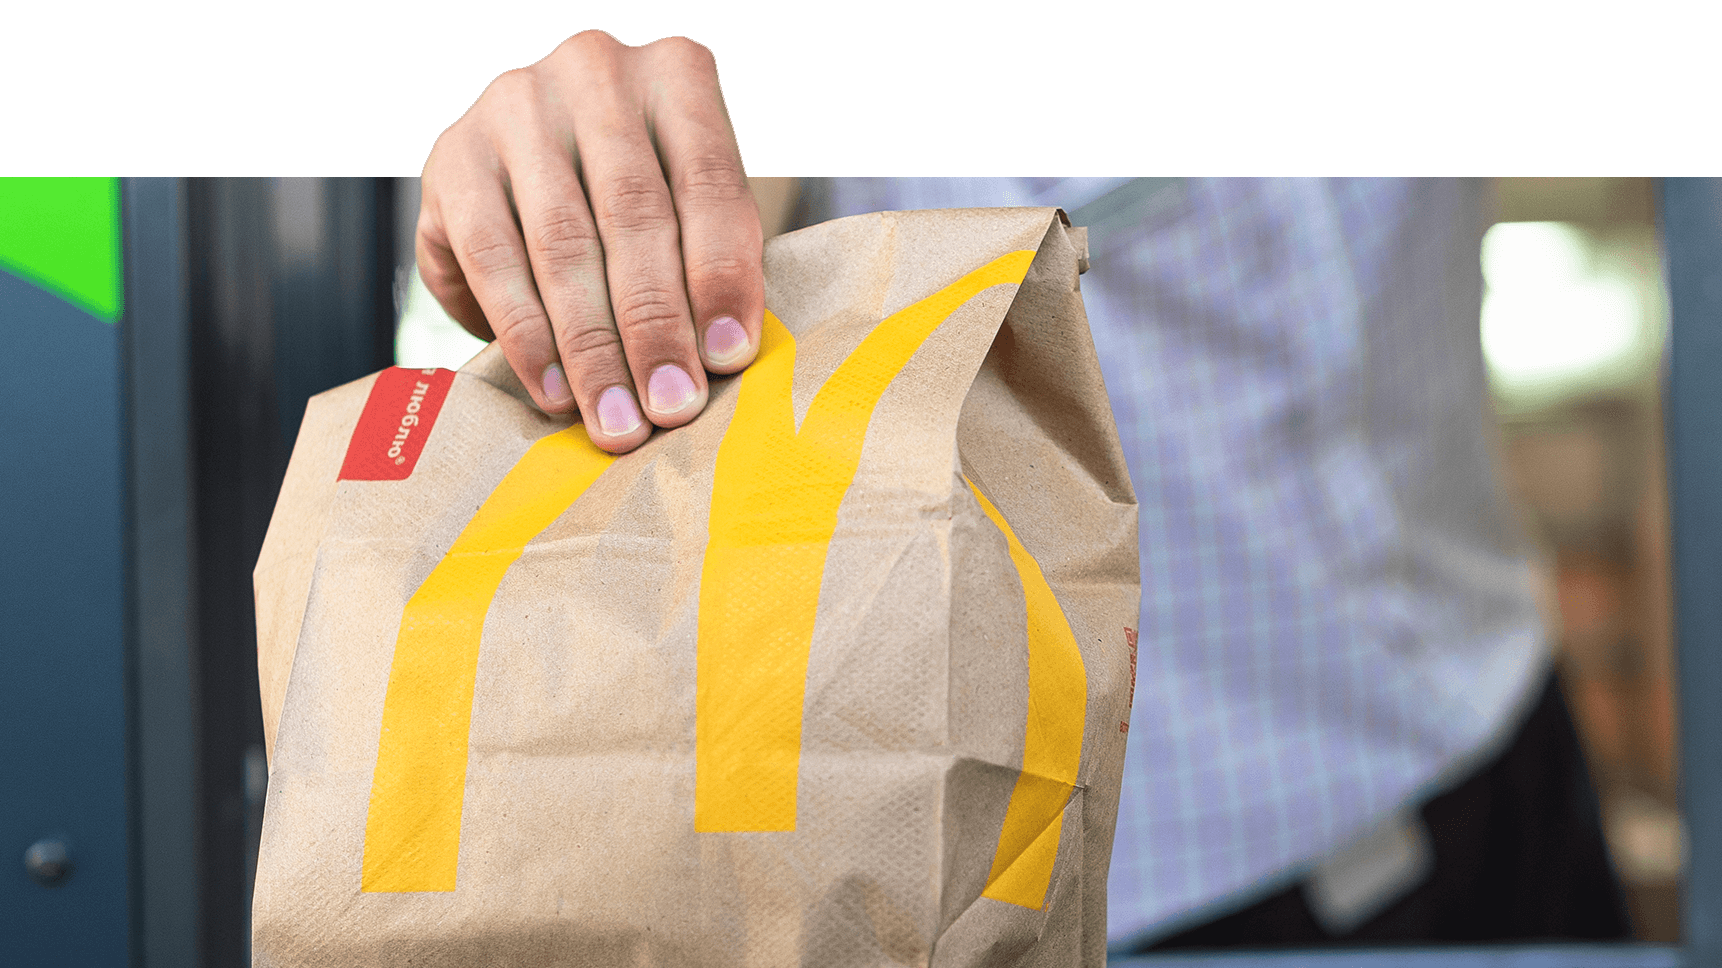 McDonald's drive thrus will have voice technology